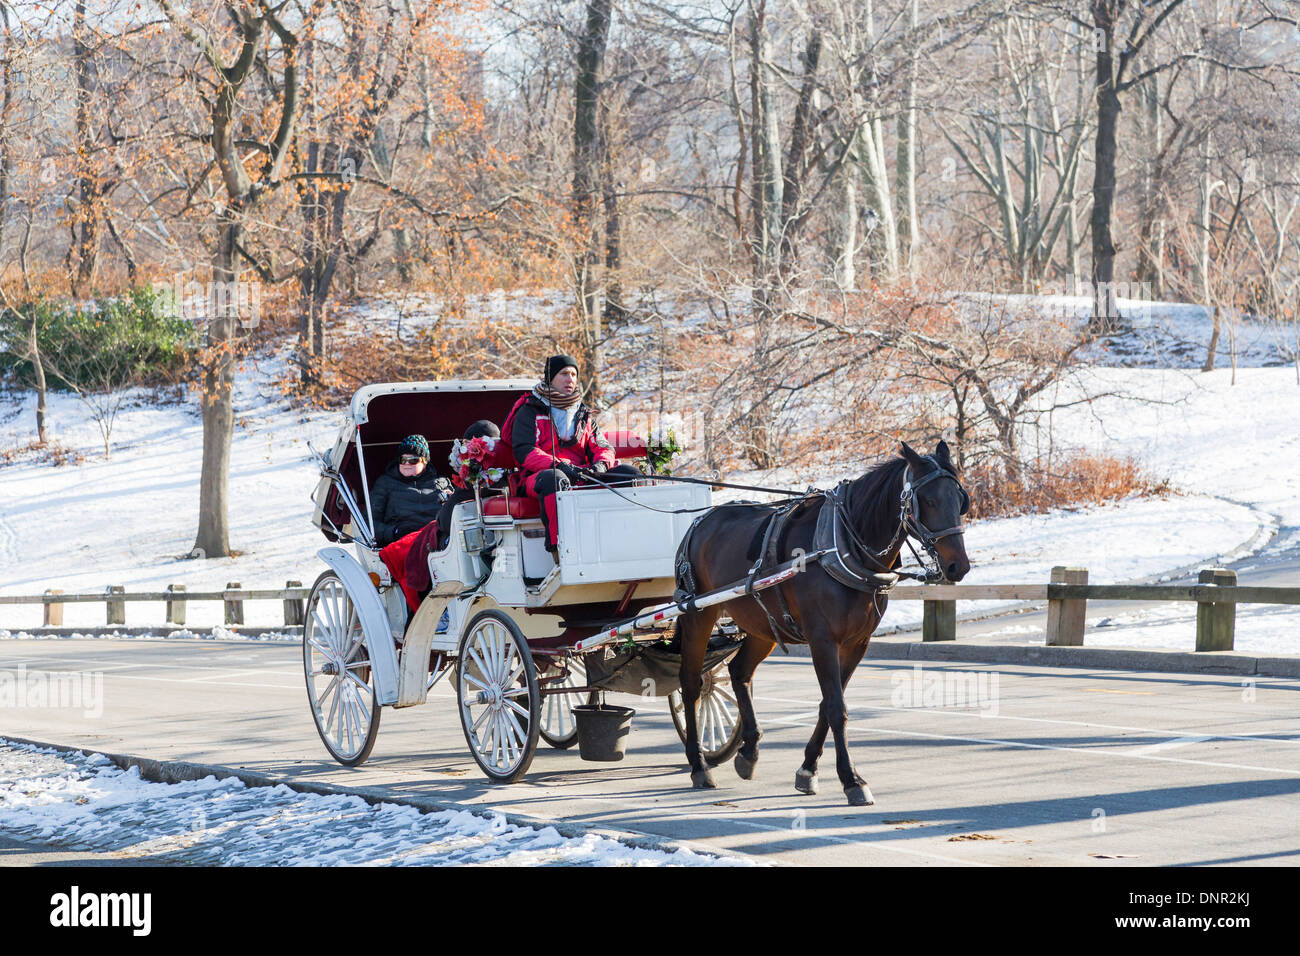 Tourists enjoy a traditional horse and carriage ride in the snow in winter in Central Park, Manhattan, New York, USA Stock Photo